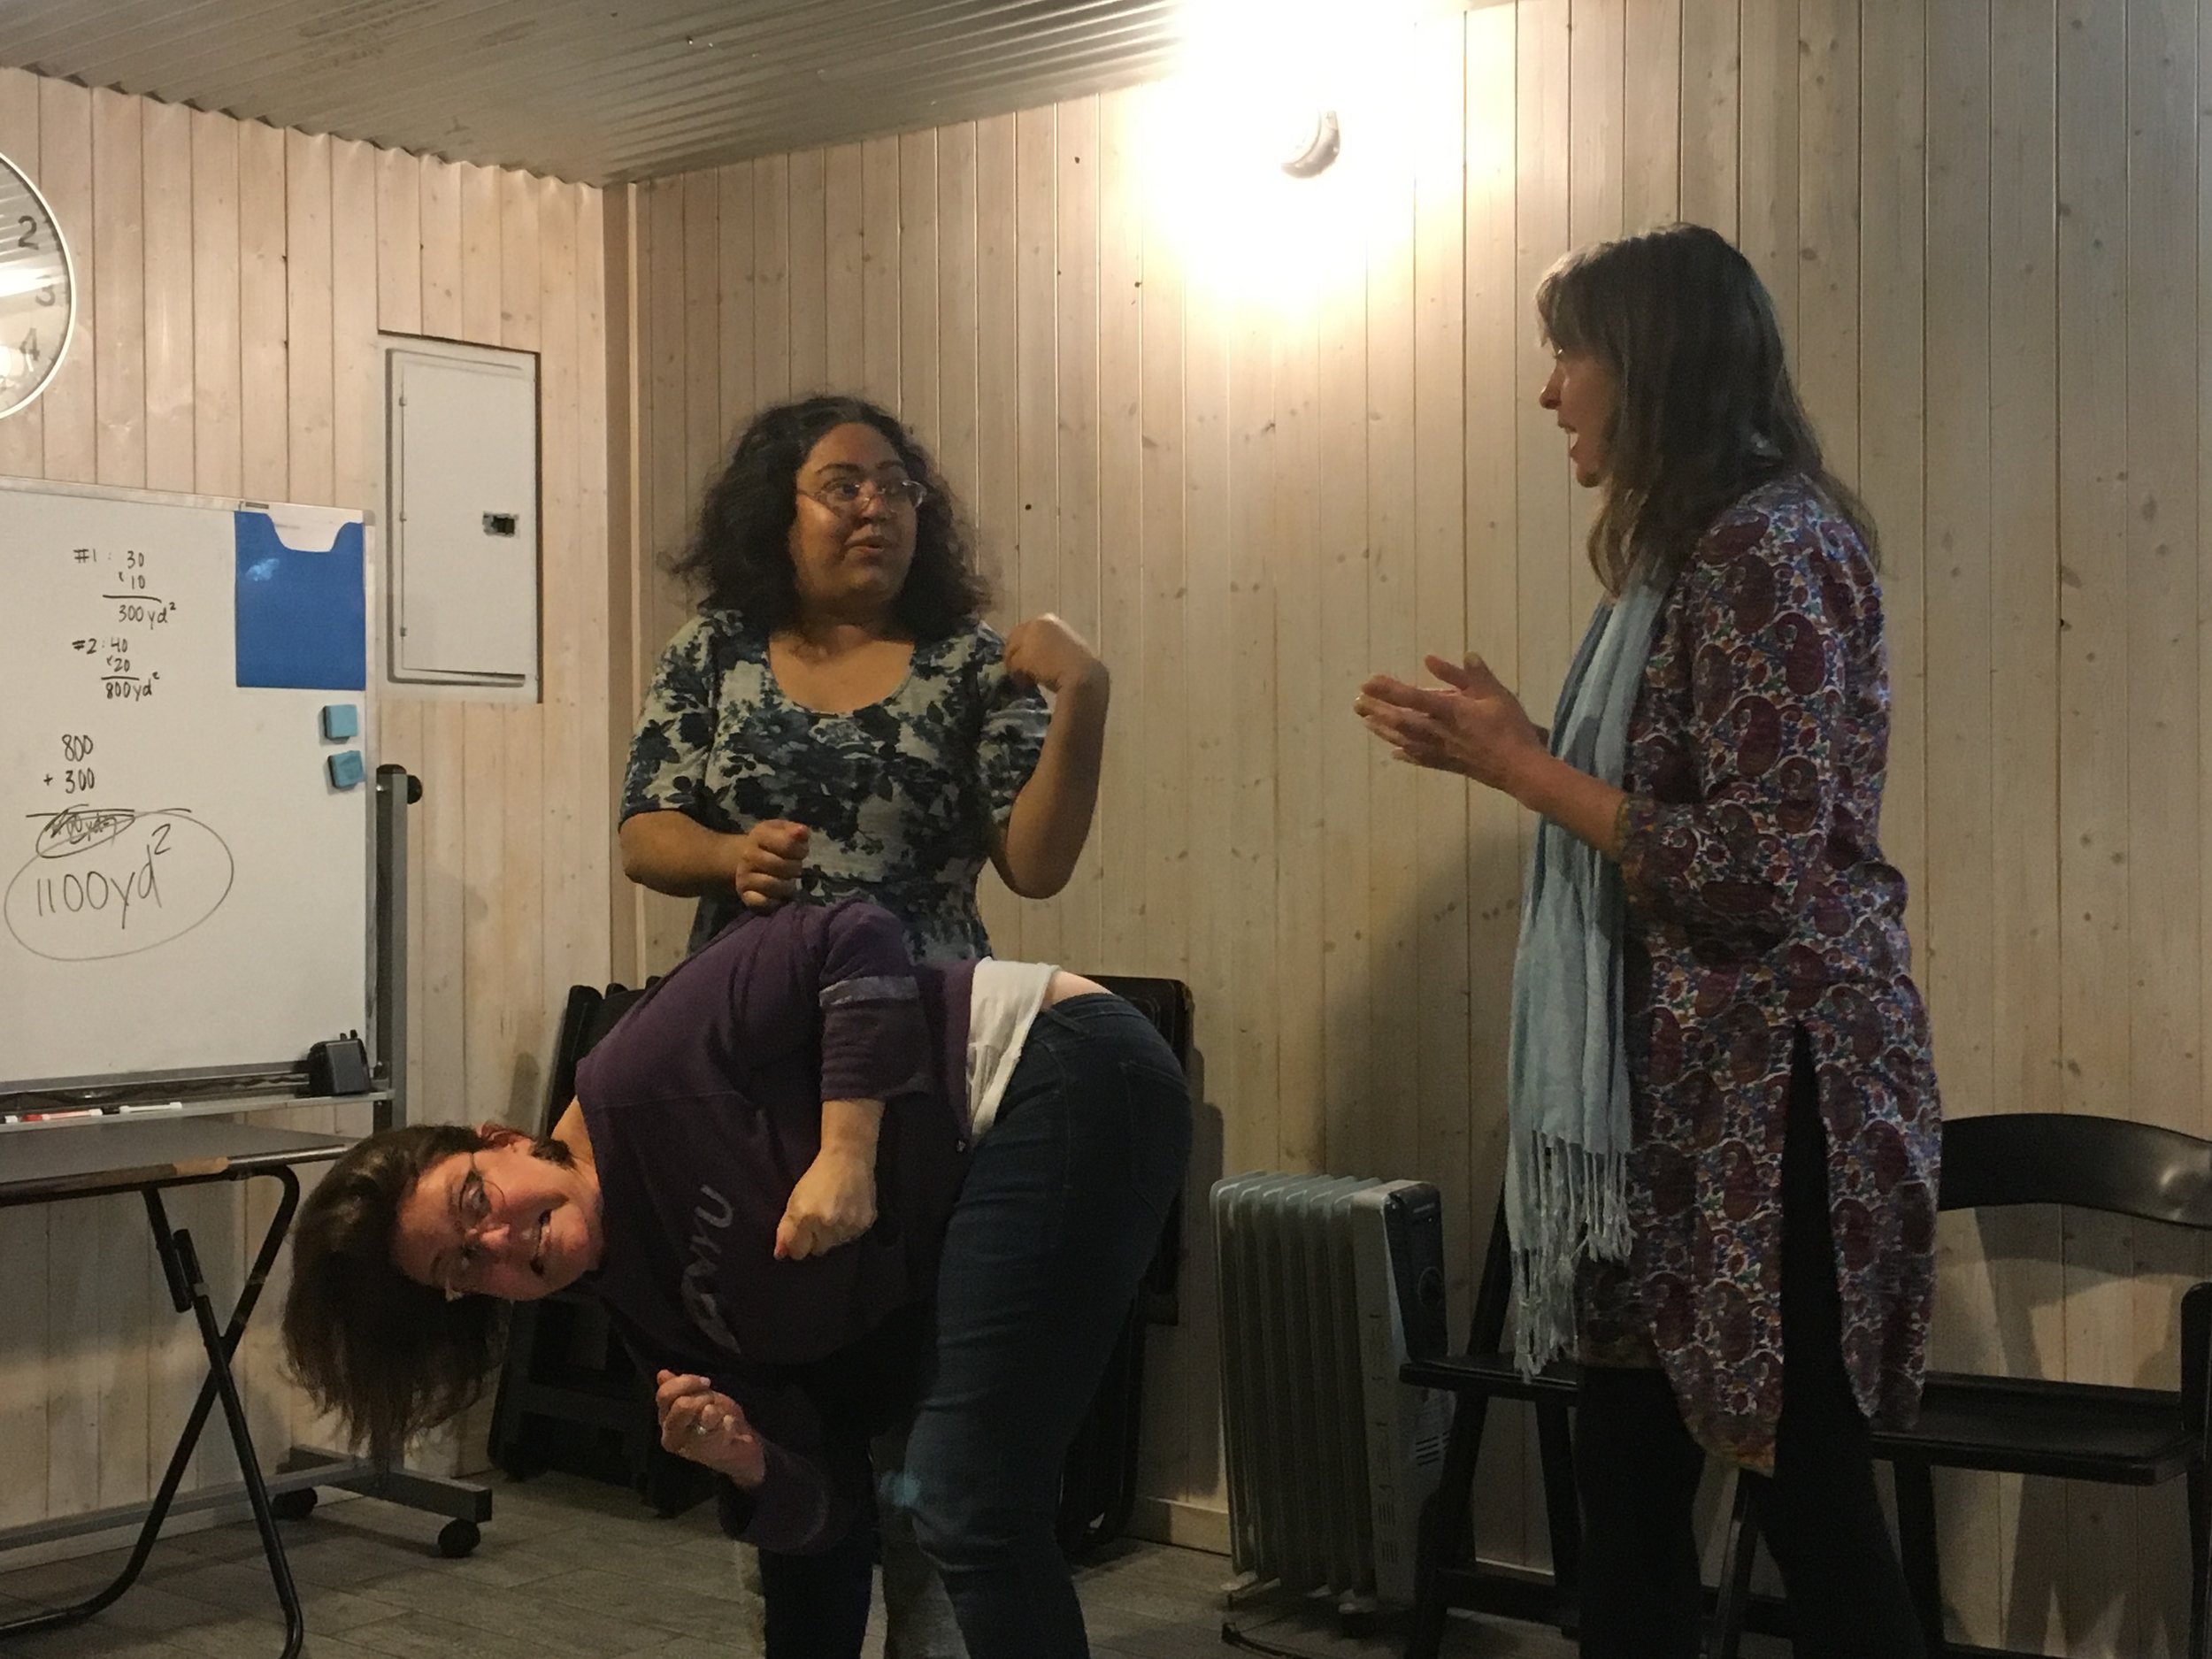 Viola, Colleen and Amy K Play Living Scenery, Winter 2019